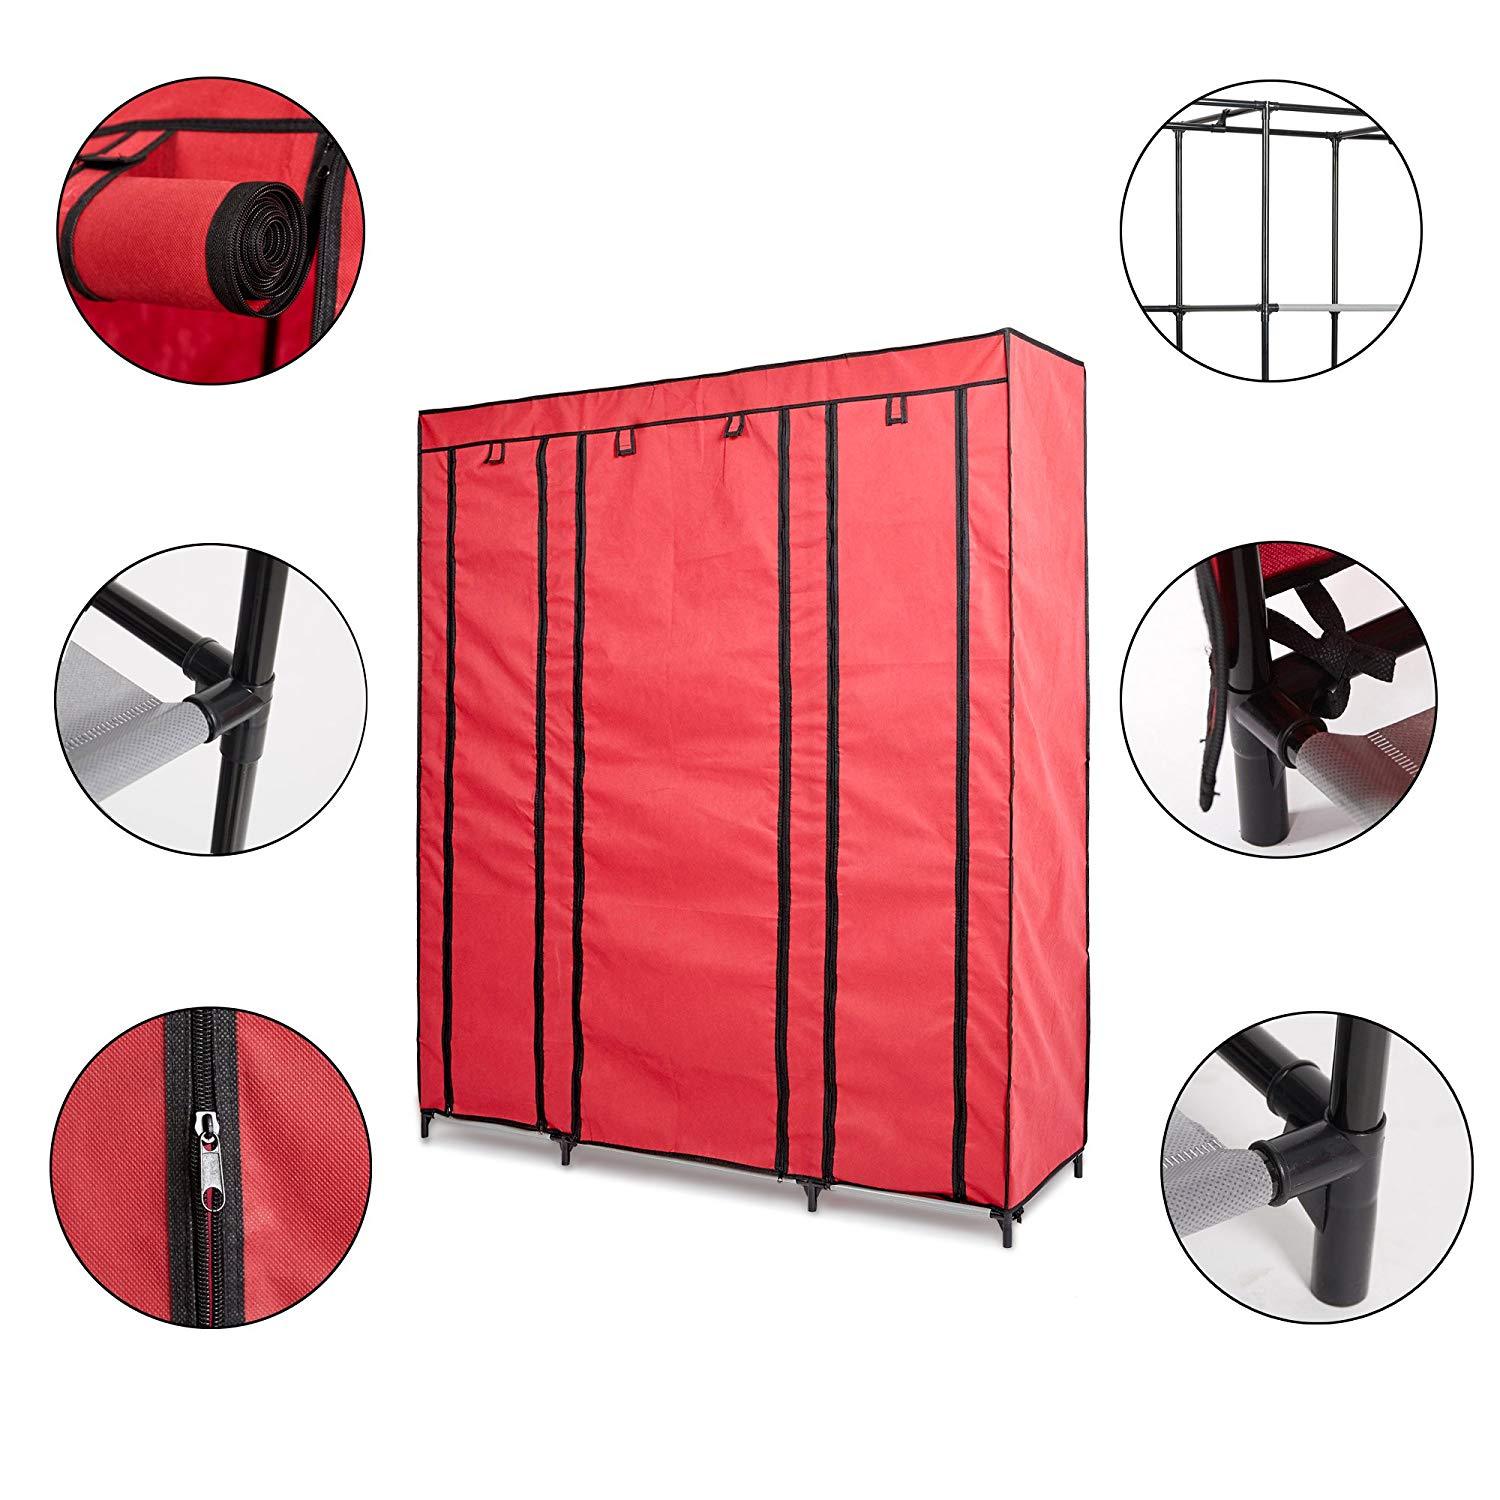 Bosonshop 59" Clothes Closet Portable Storage Organizer with Hanging Rod, Nonwoven Fabric, 12 Storage Shelves-Red